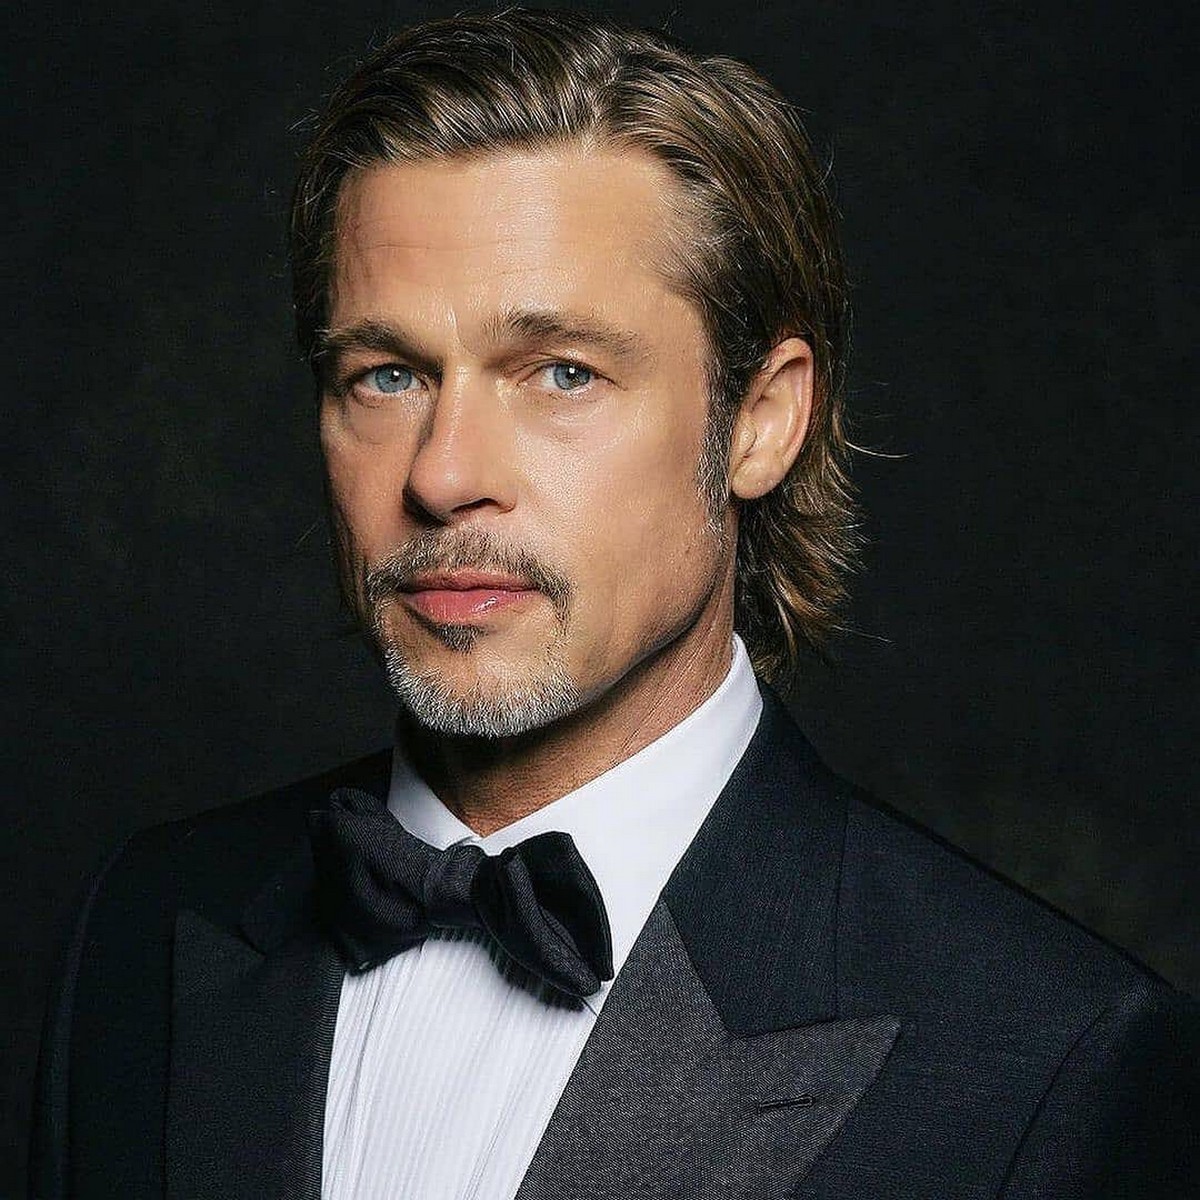 19 Best Brad Pitt Haircuts To Copy in 2023 | Mens hairstyles short, Mens  haircuts short, Haircuts for men